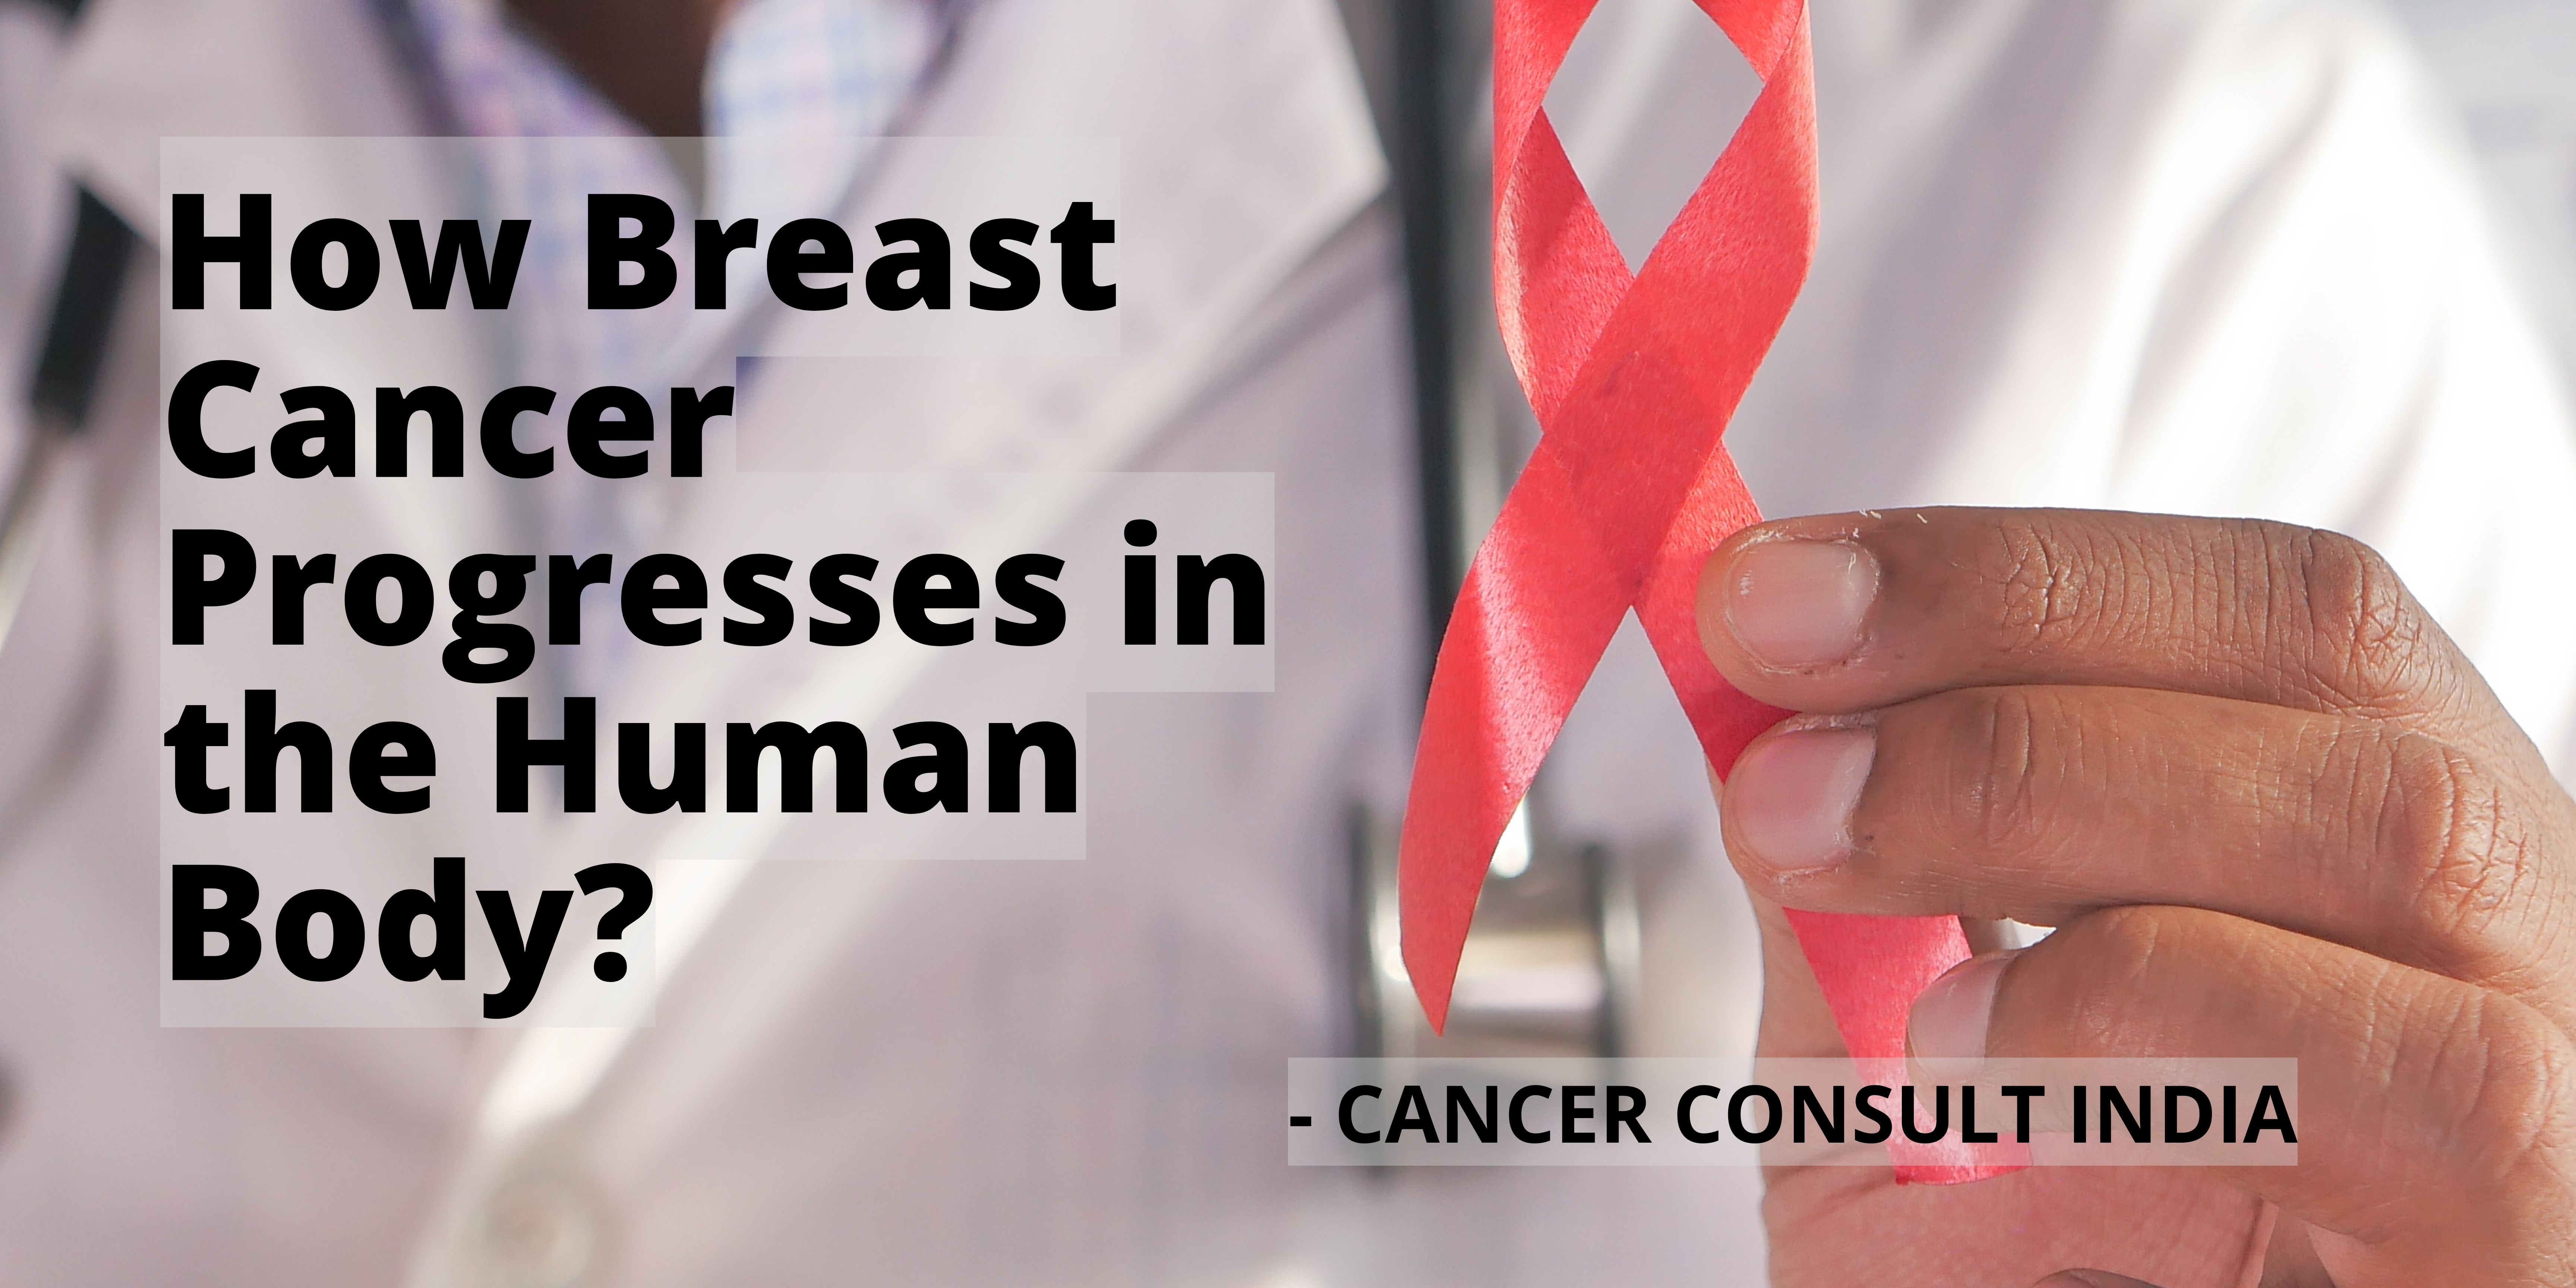 How Breast Cancer Progresses in the Human Body?